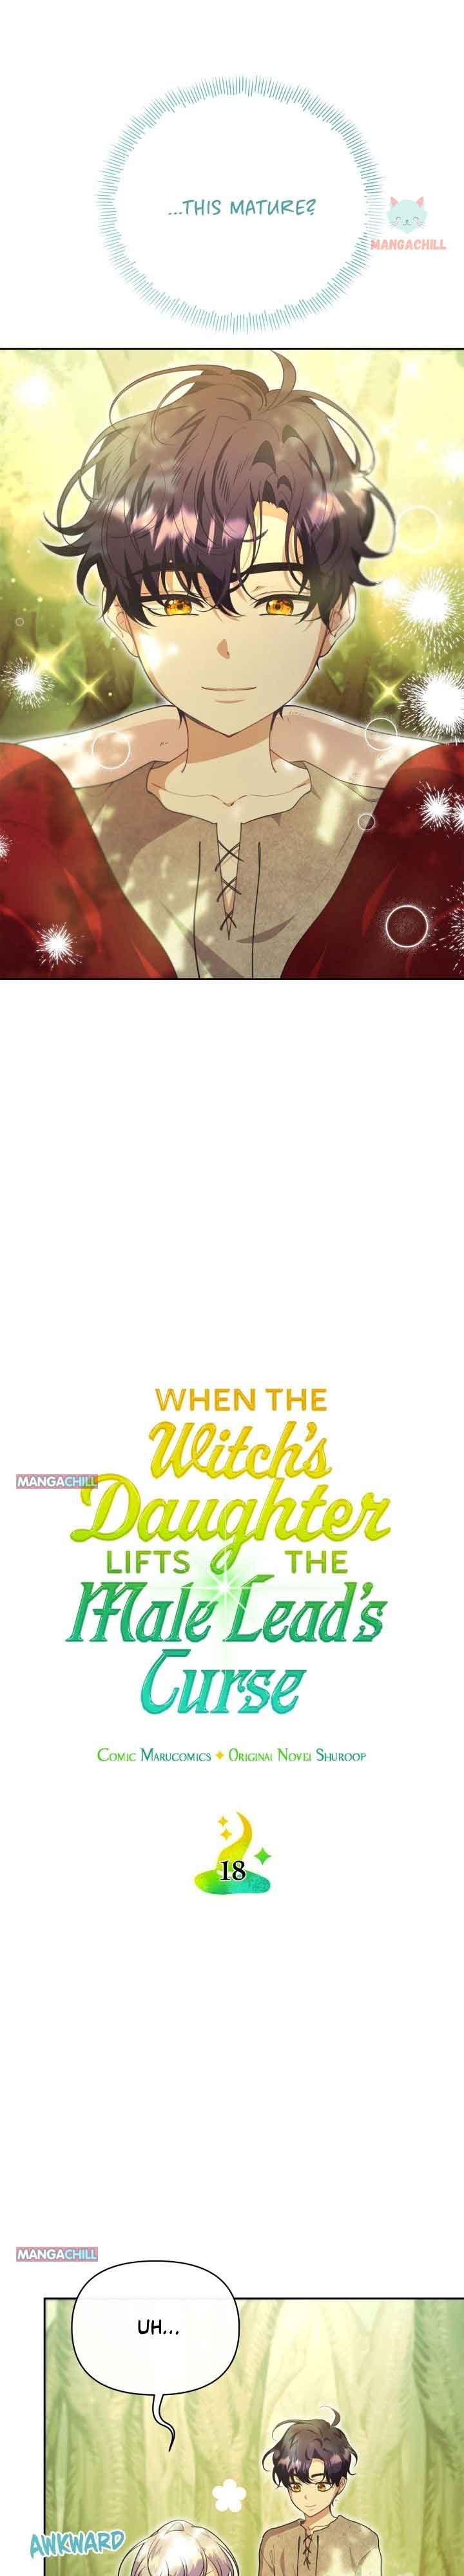 When the Witch’s Daughter Lifts the Male Lead’s Curse chapter 18